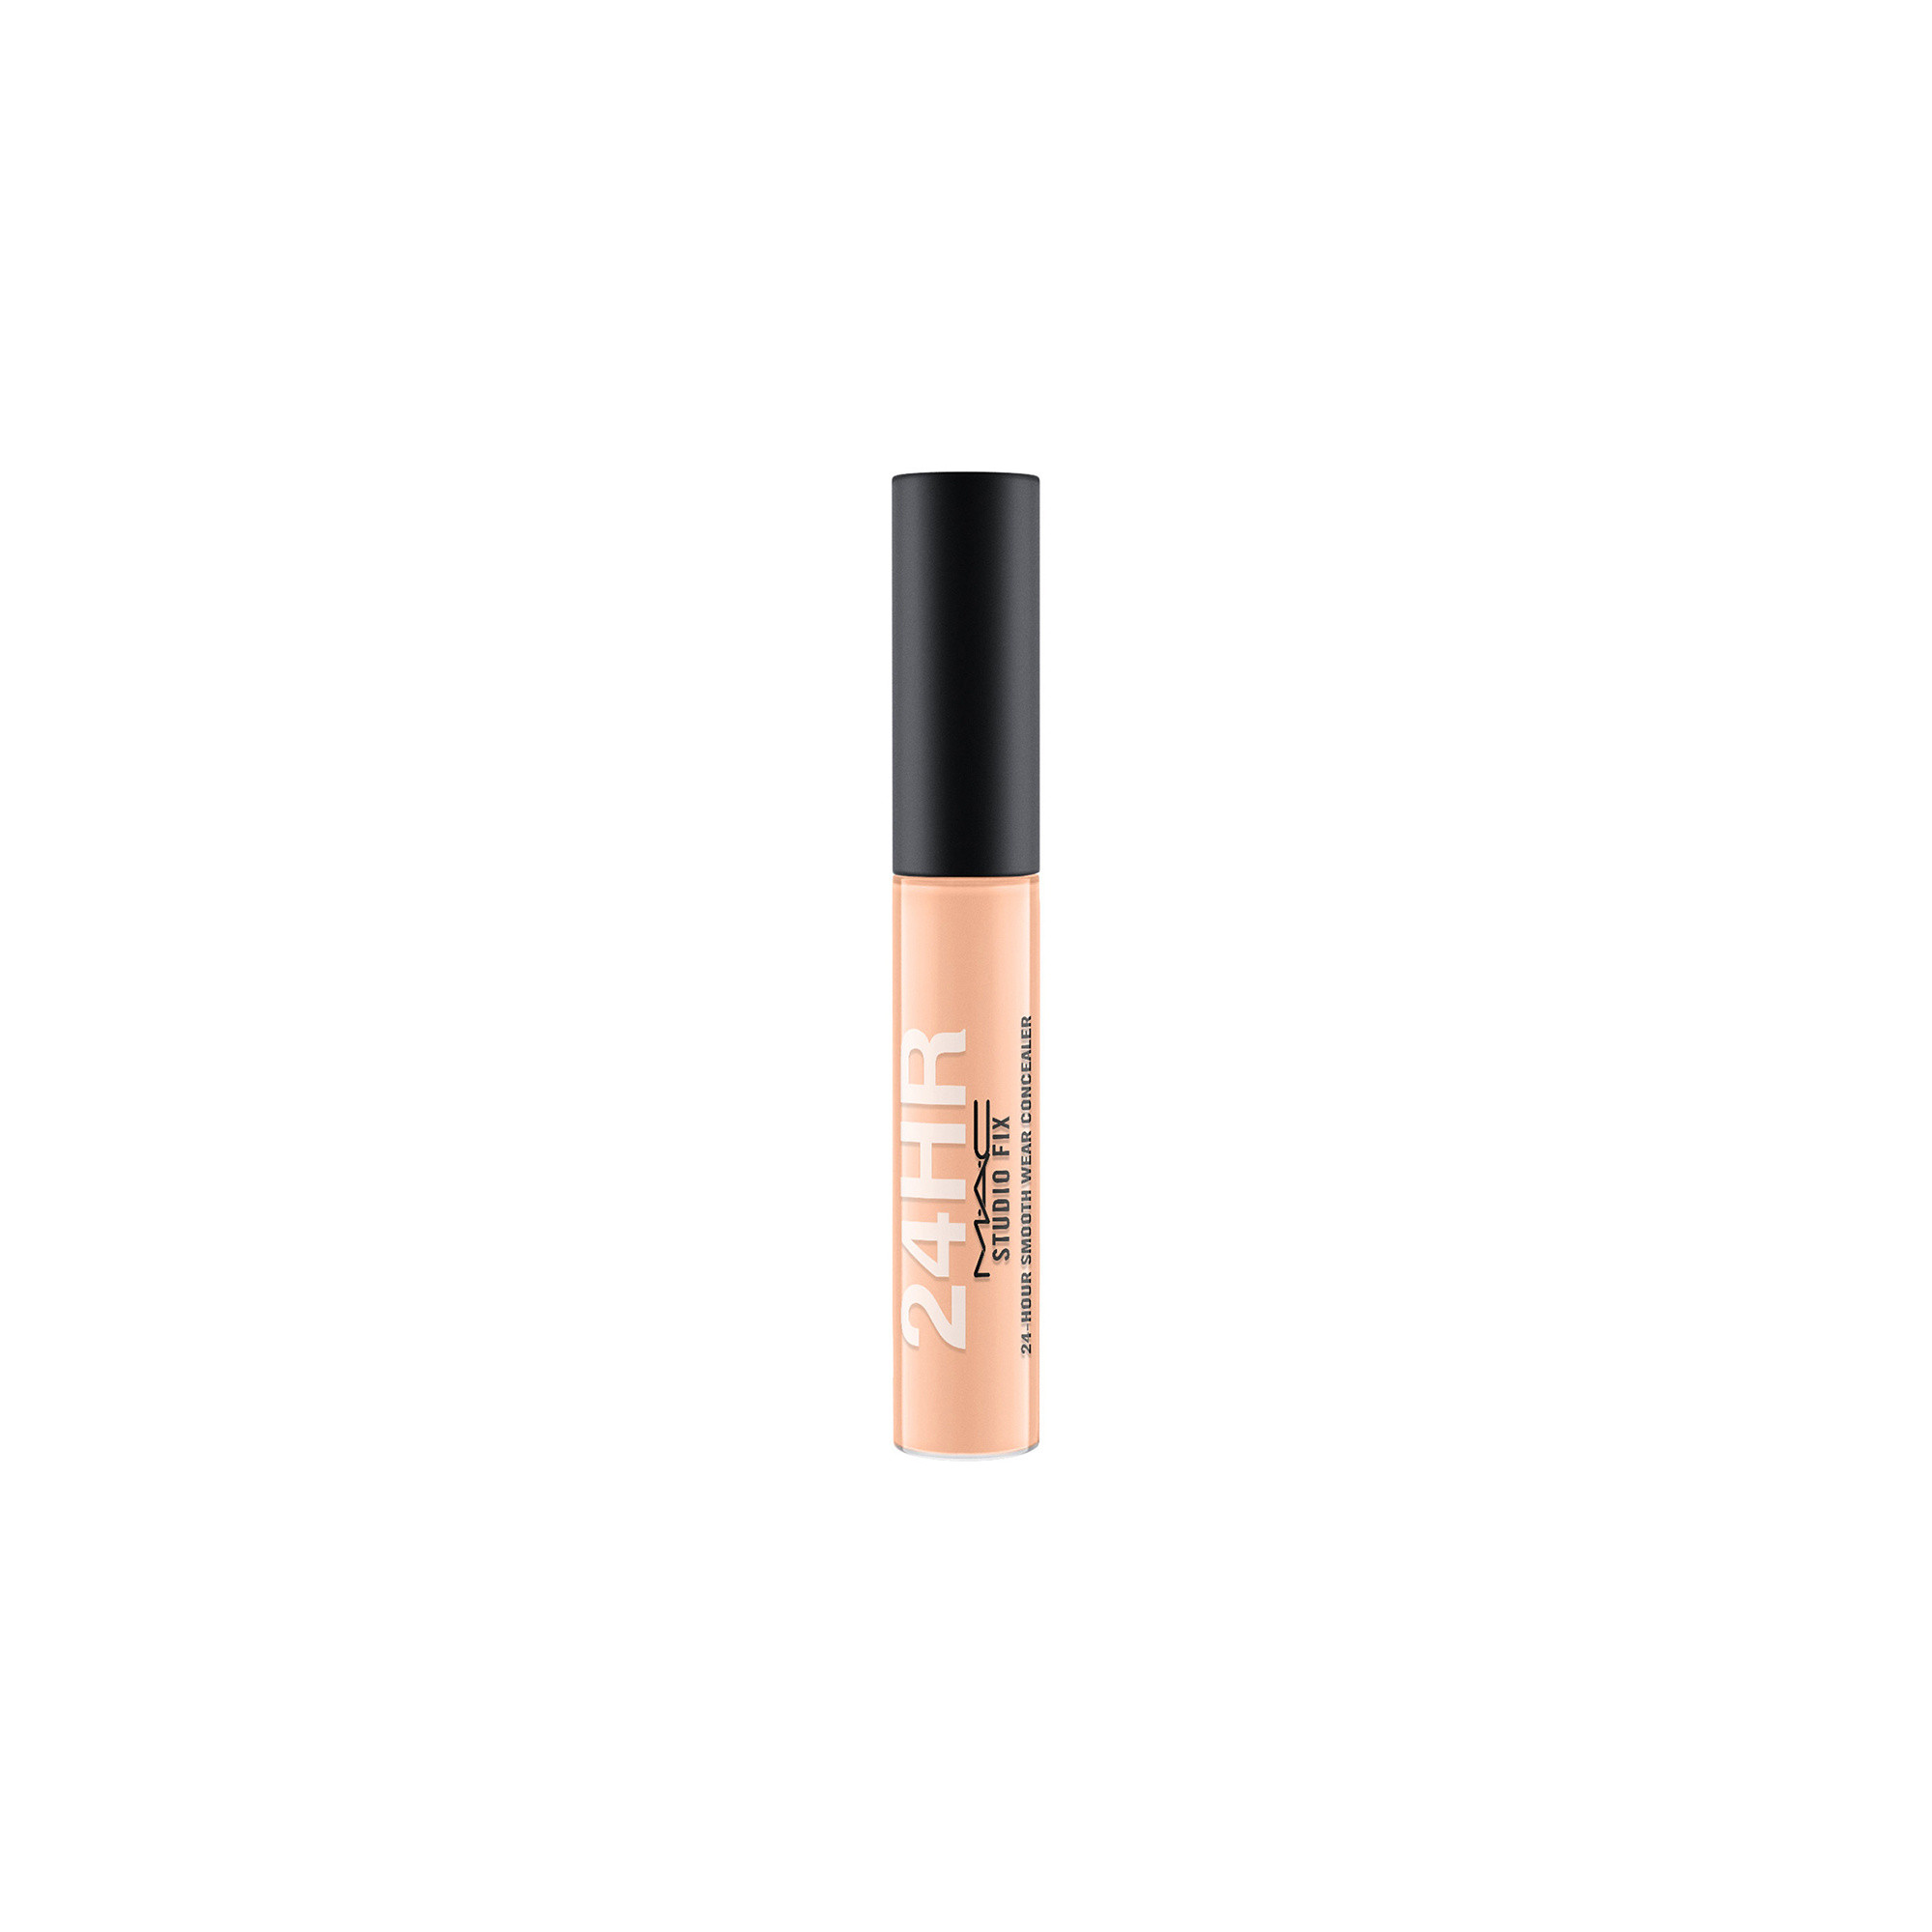 Studio Fix 24H Concealer - NW32, NW32, large image number 0